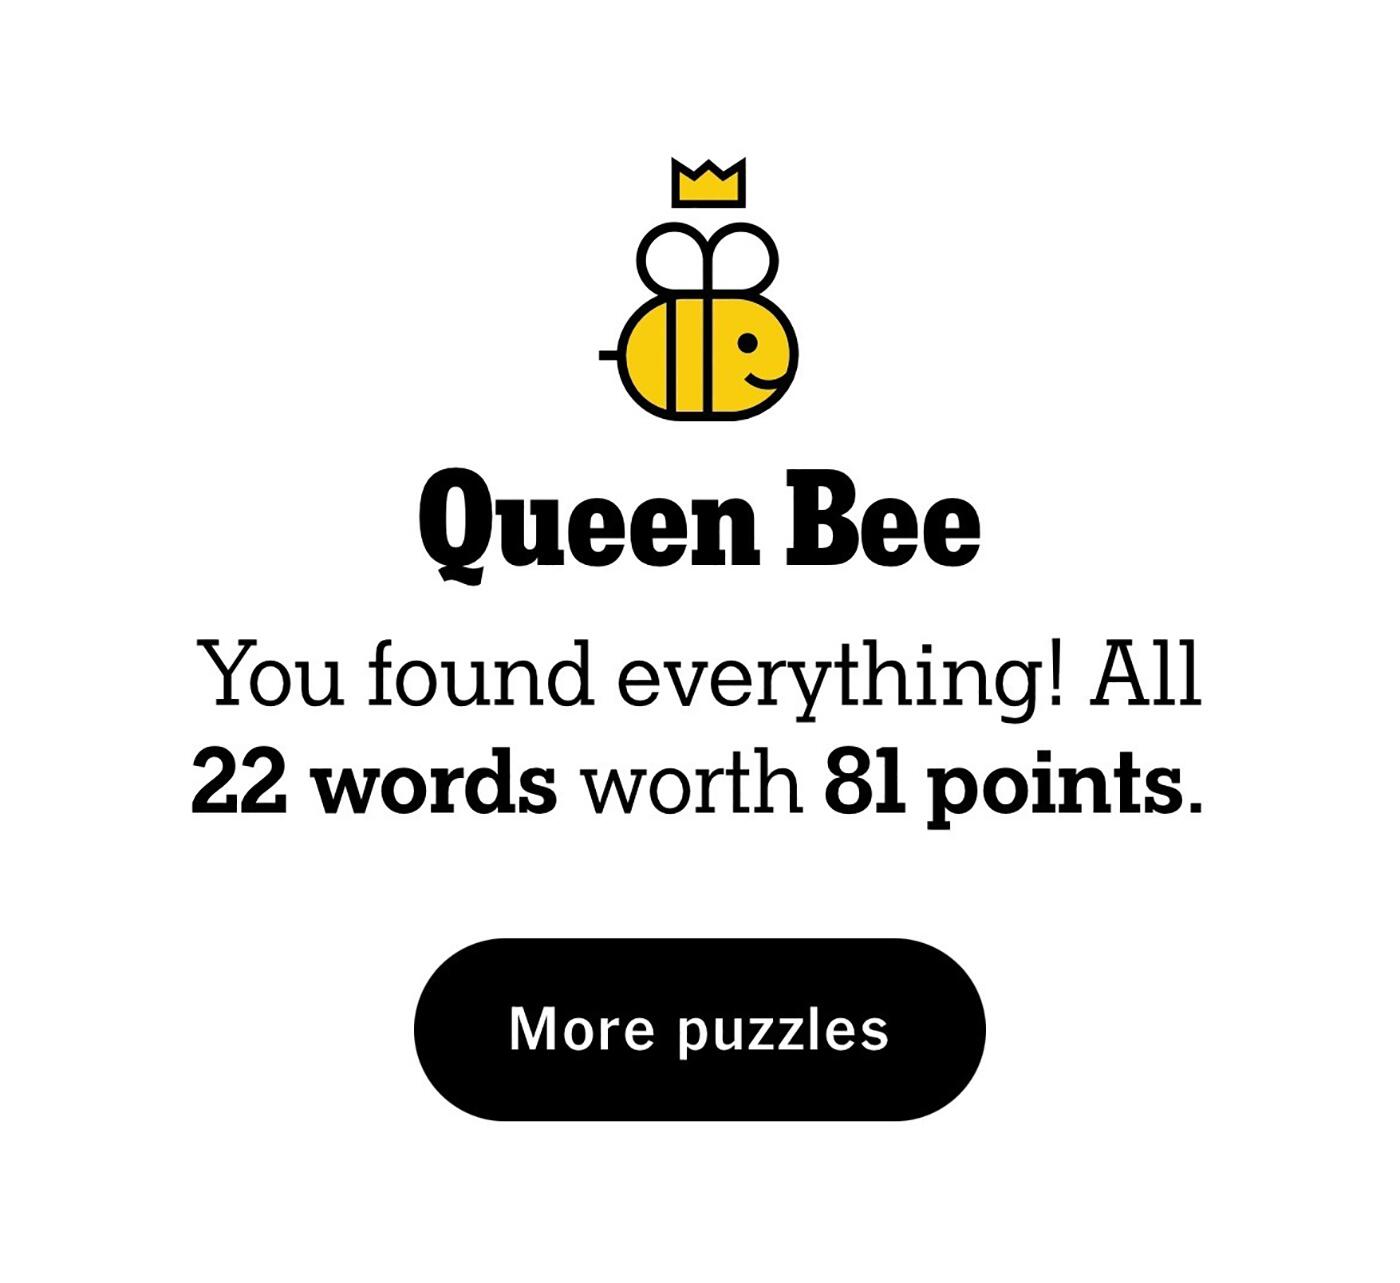 QUEEN BEE - Songs, Events and Music Stats